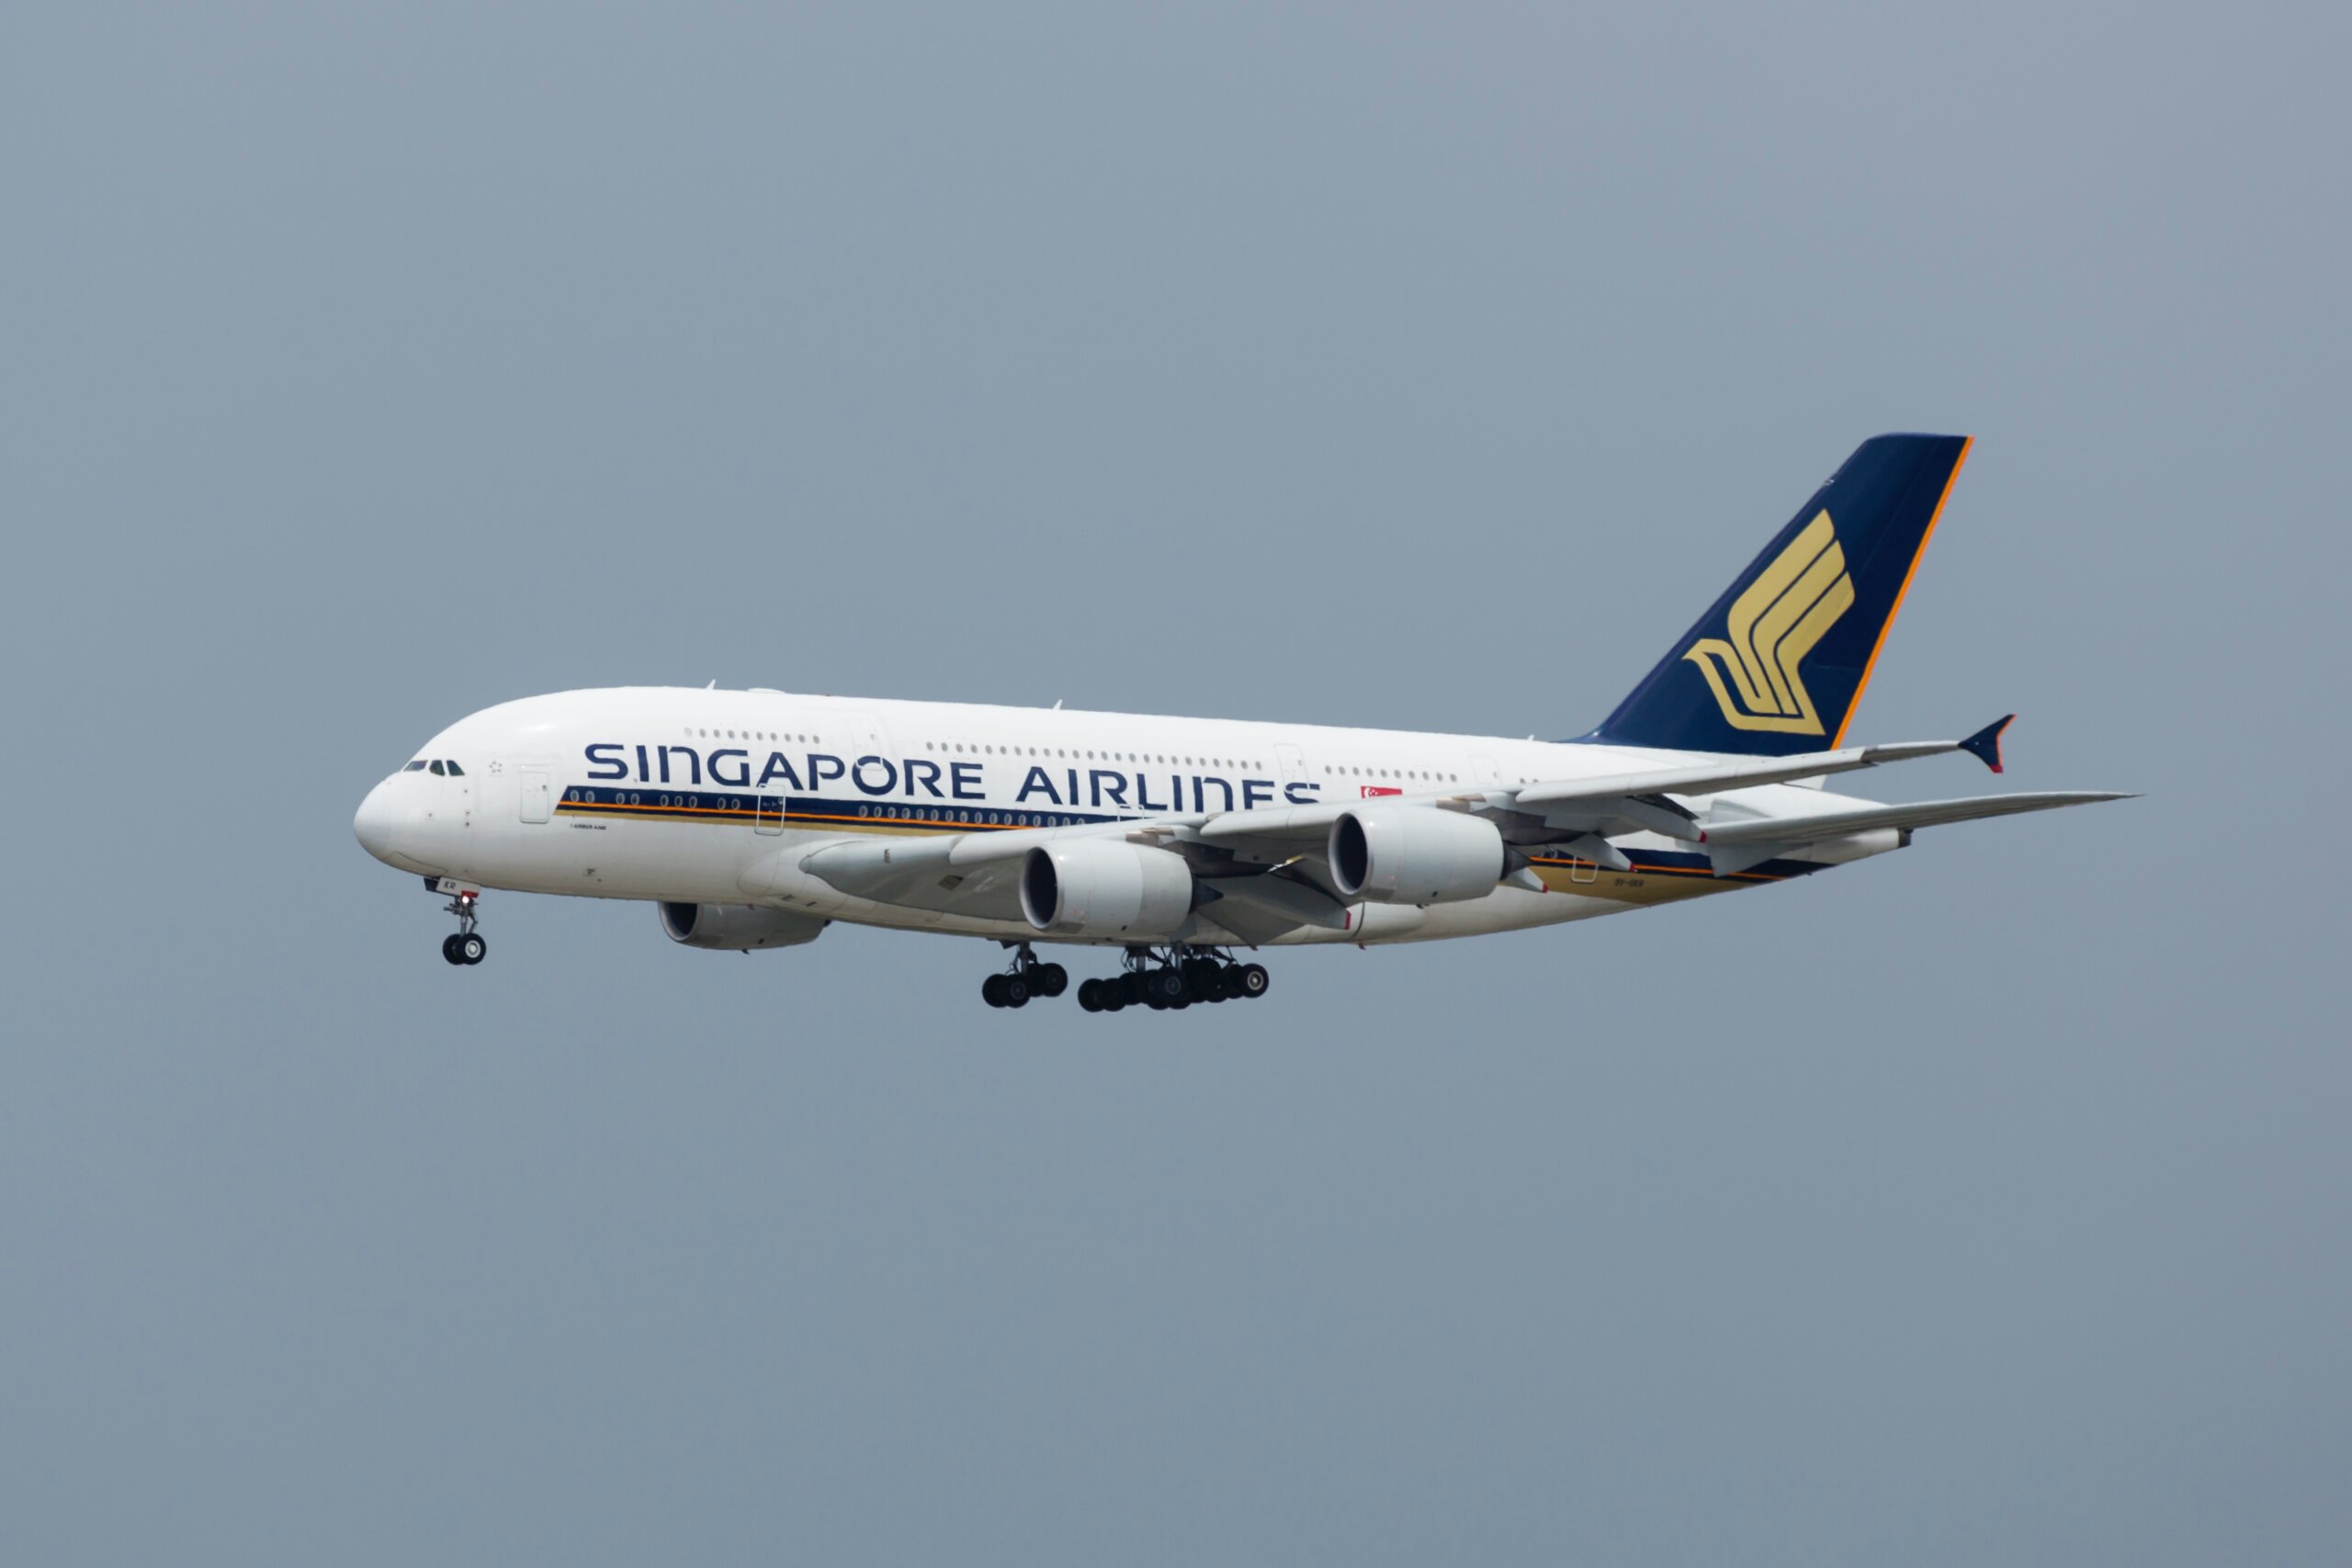 airplane with Singapore Airlines on it